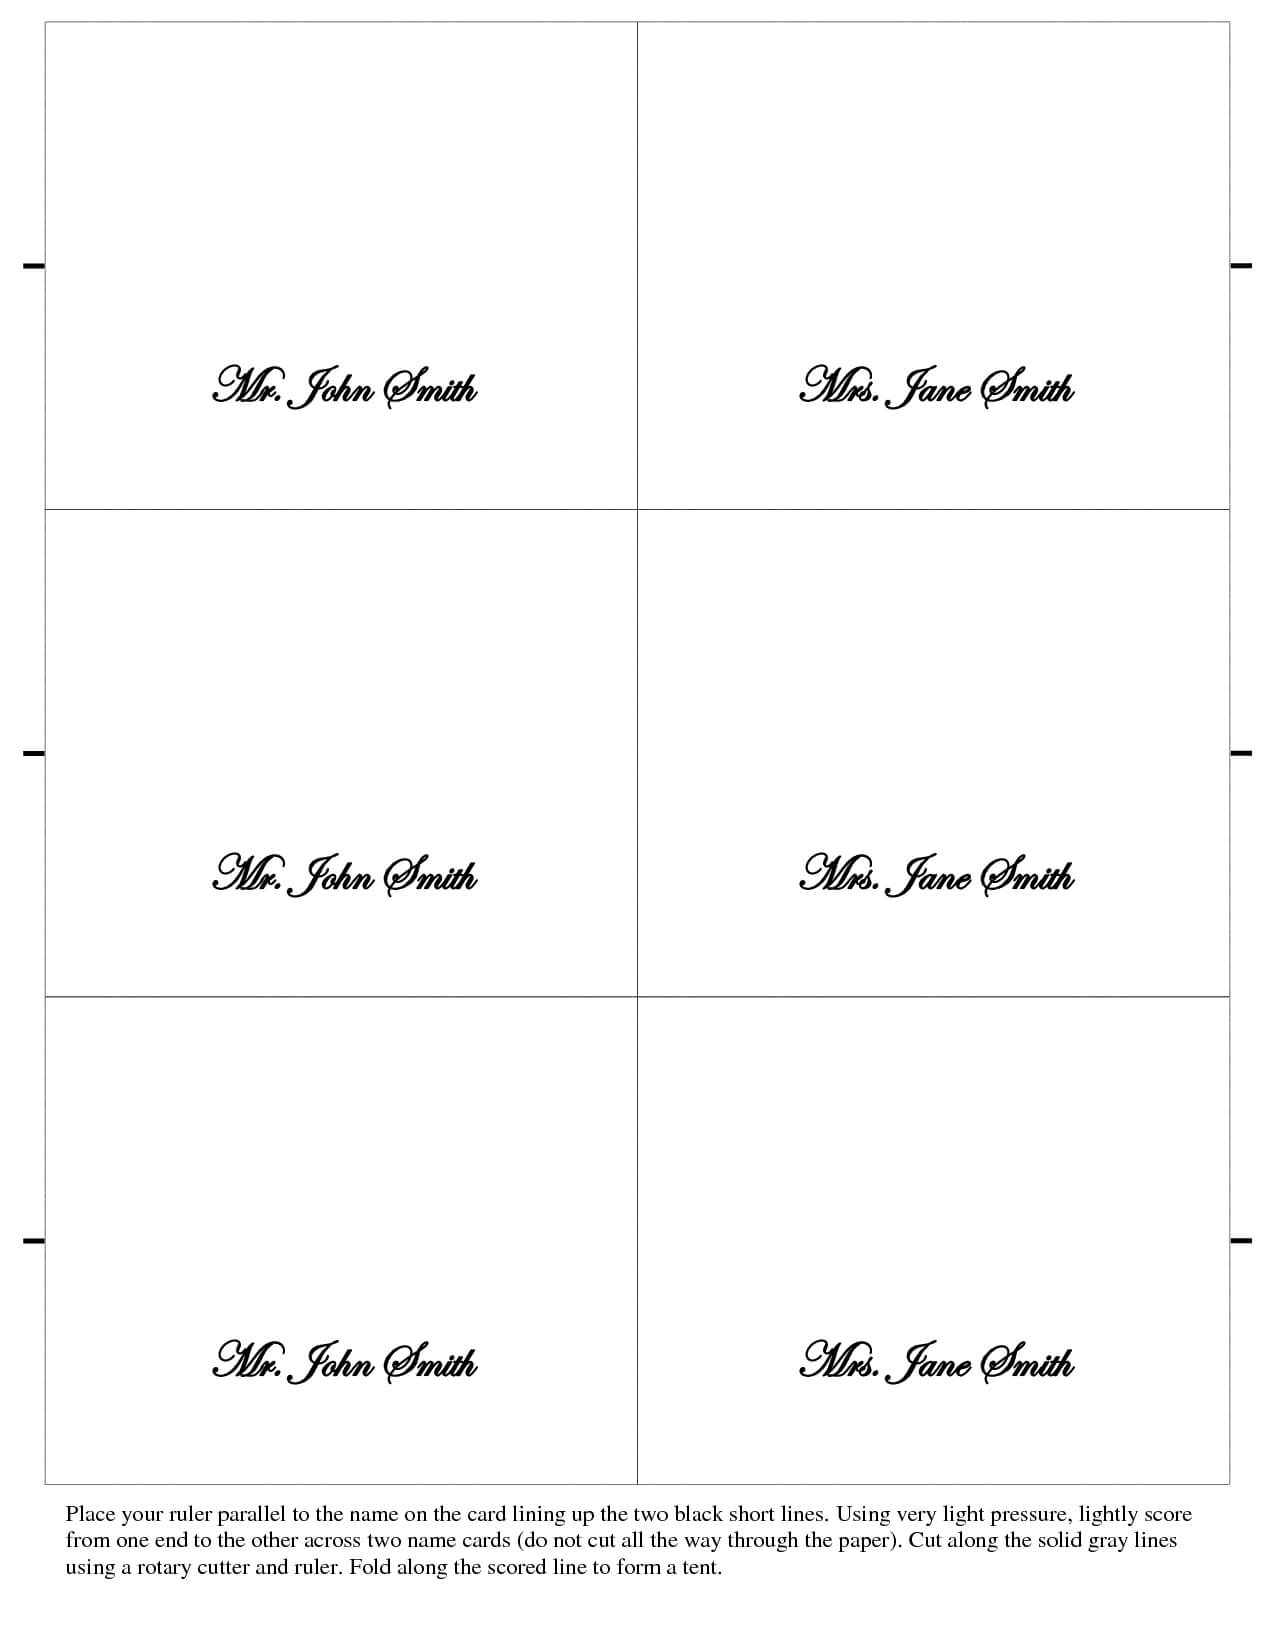 003 Free Place Card Template Ideas Table Mwd108673 Vert Intended For Microsoft Word Place Card Template